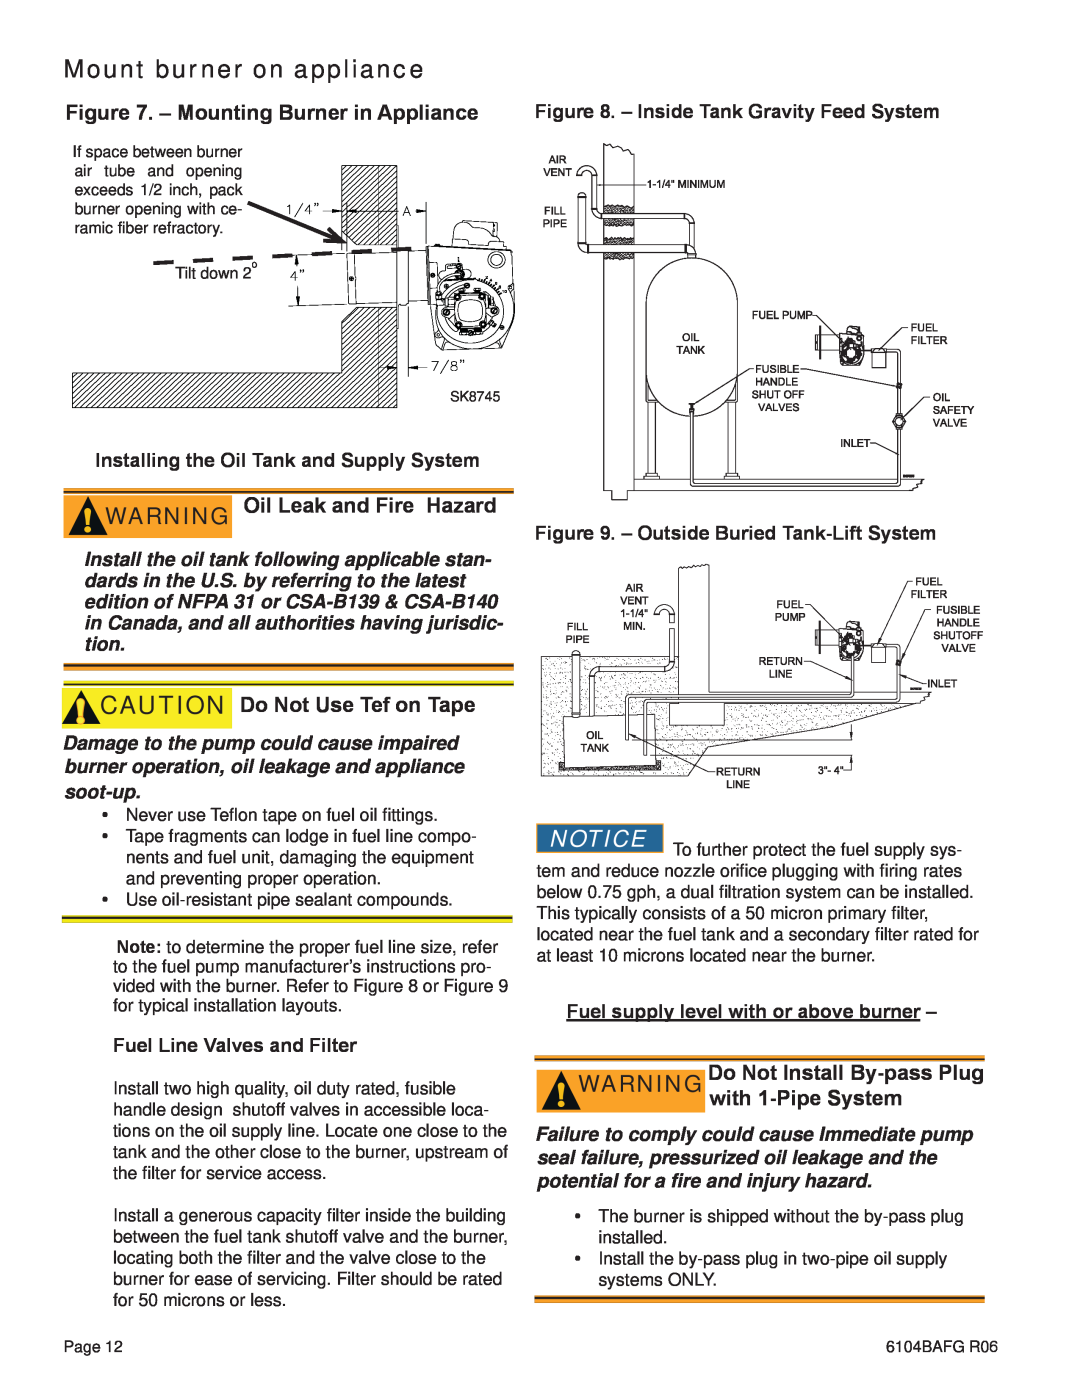 Weil-McLain UO-4 CV manual Mounting Burner in Appliance, WARNING Oil Leak and Fire Hazard, CAUTION Do Not Use Tef on Tape 